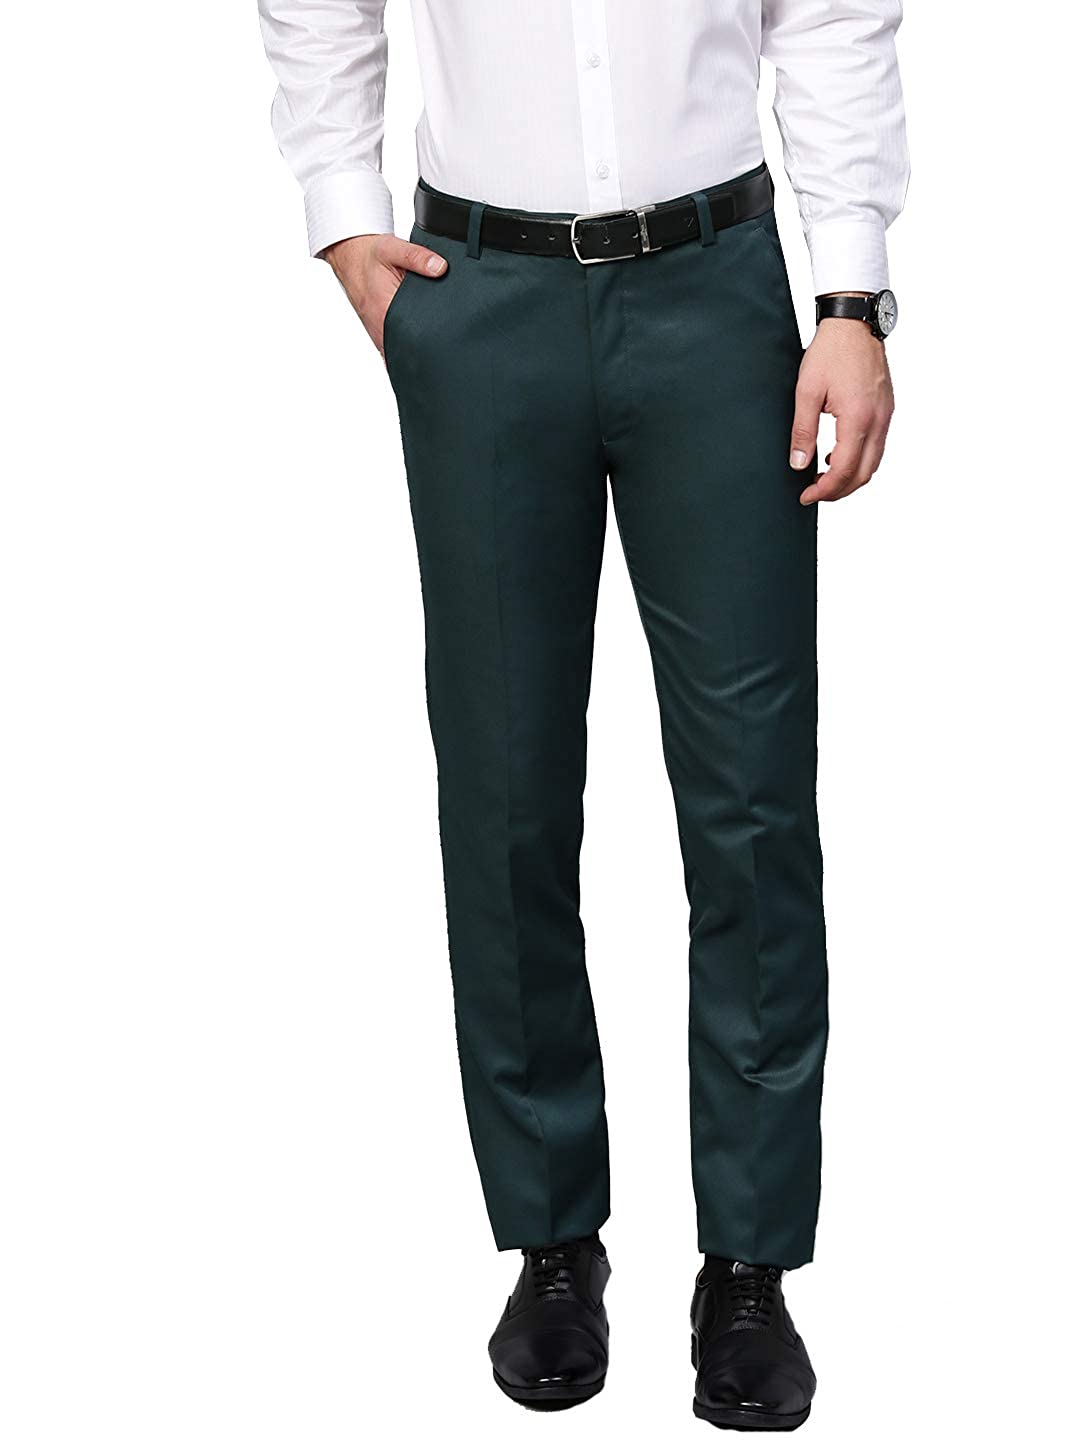 Casual Men Business Formal Pants Straight Trousers Check Stretch Slim Fit  Pants | eBay